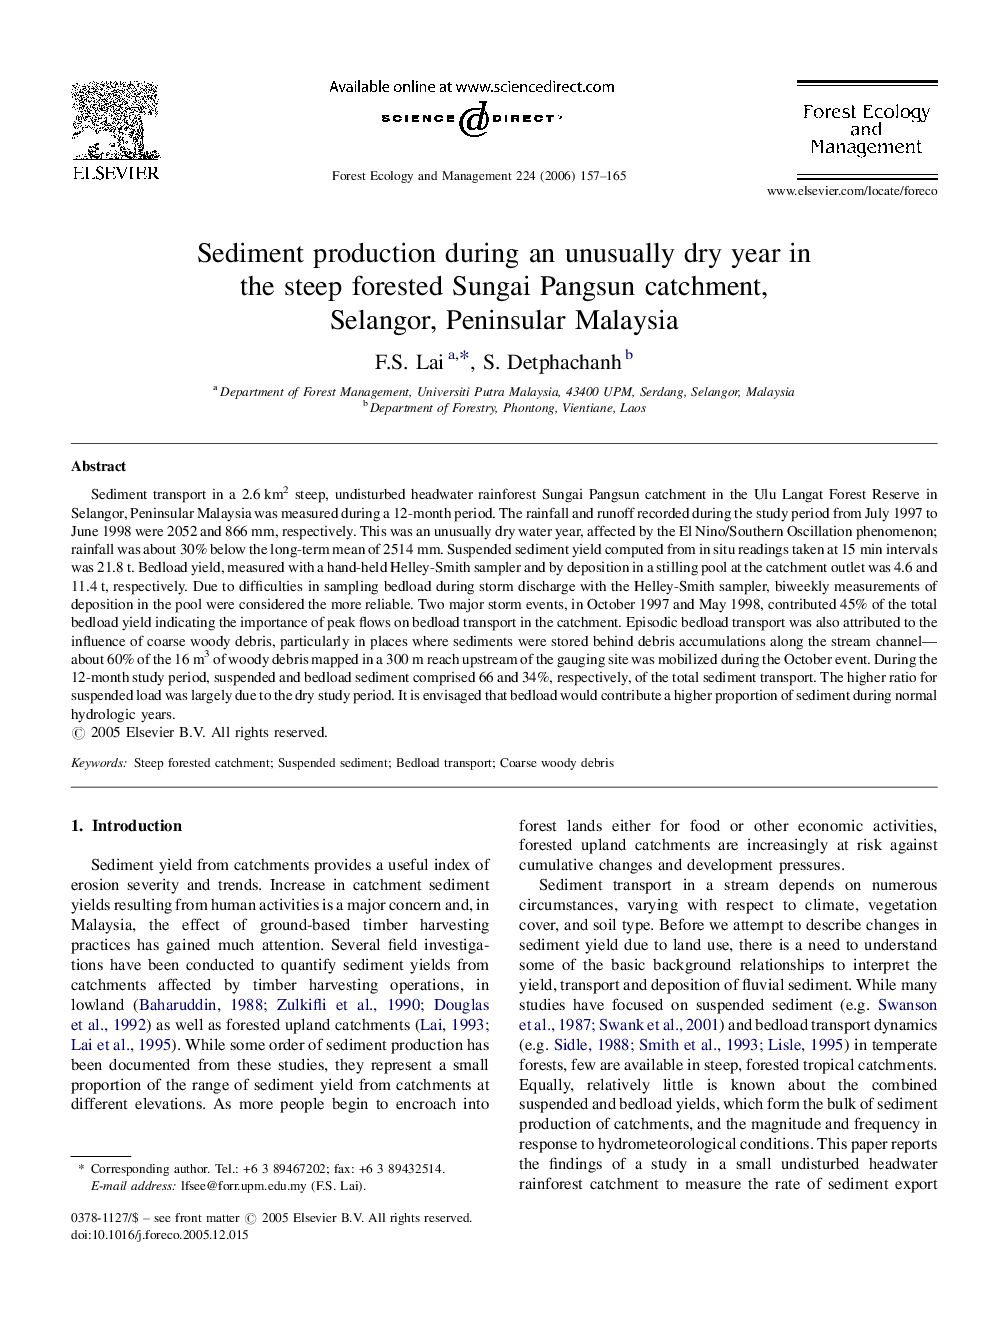 Sediment production during an unusually dry year in the steep forested Sungai Pangsun catchment, Selangor, Peninsular Malaysia